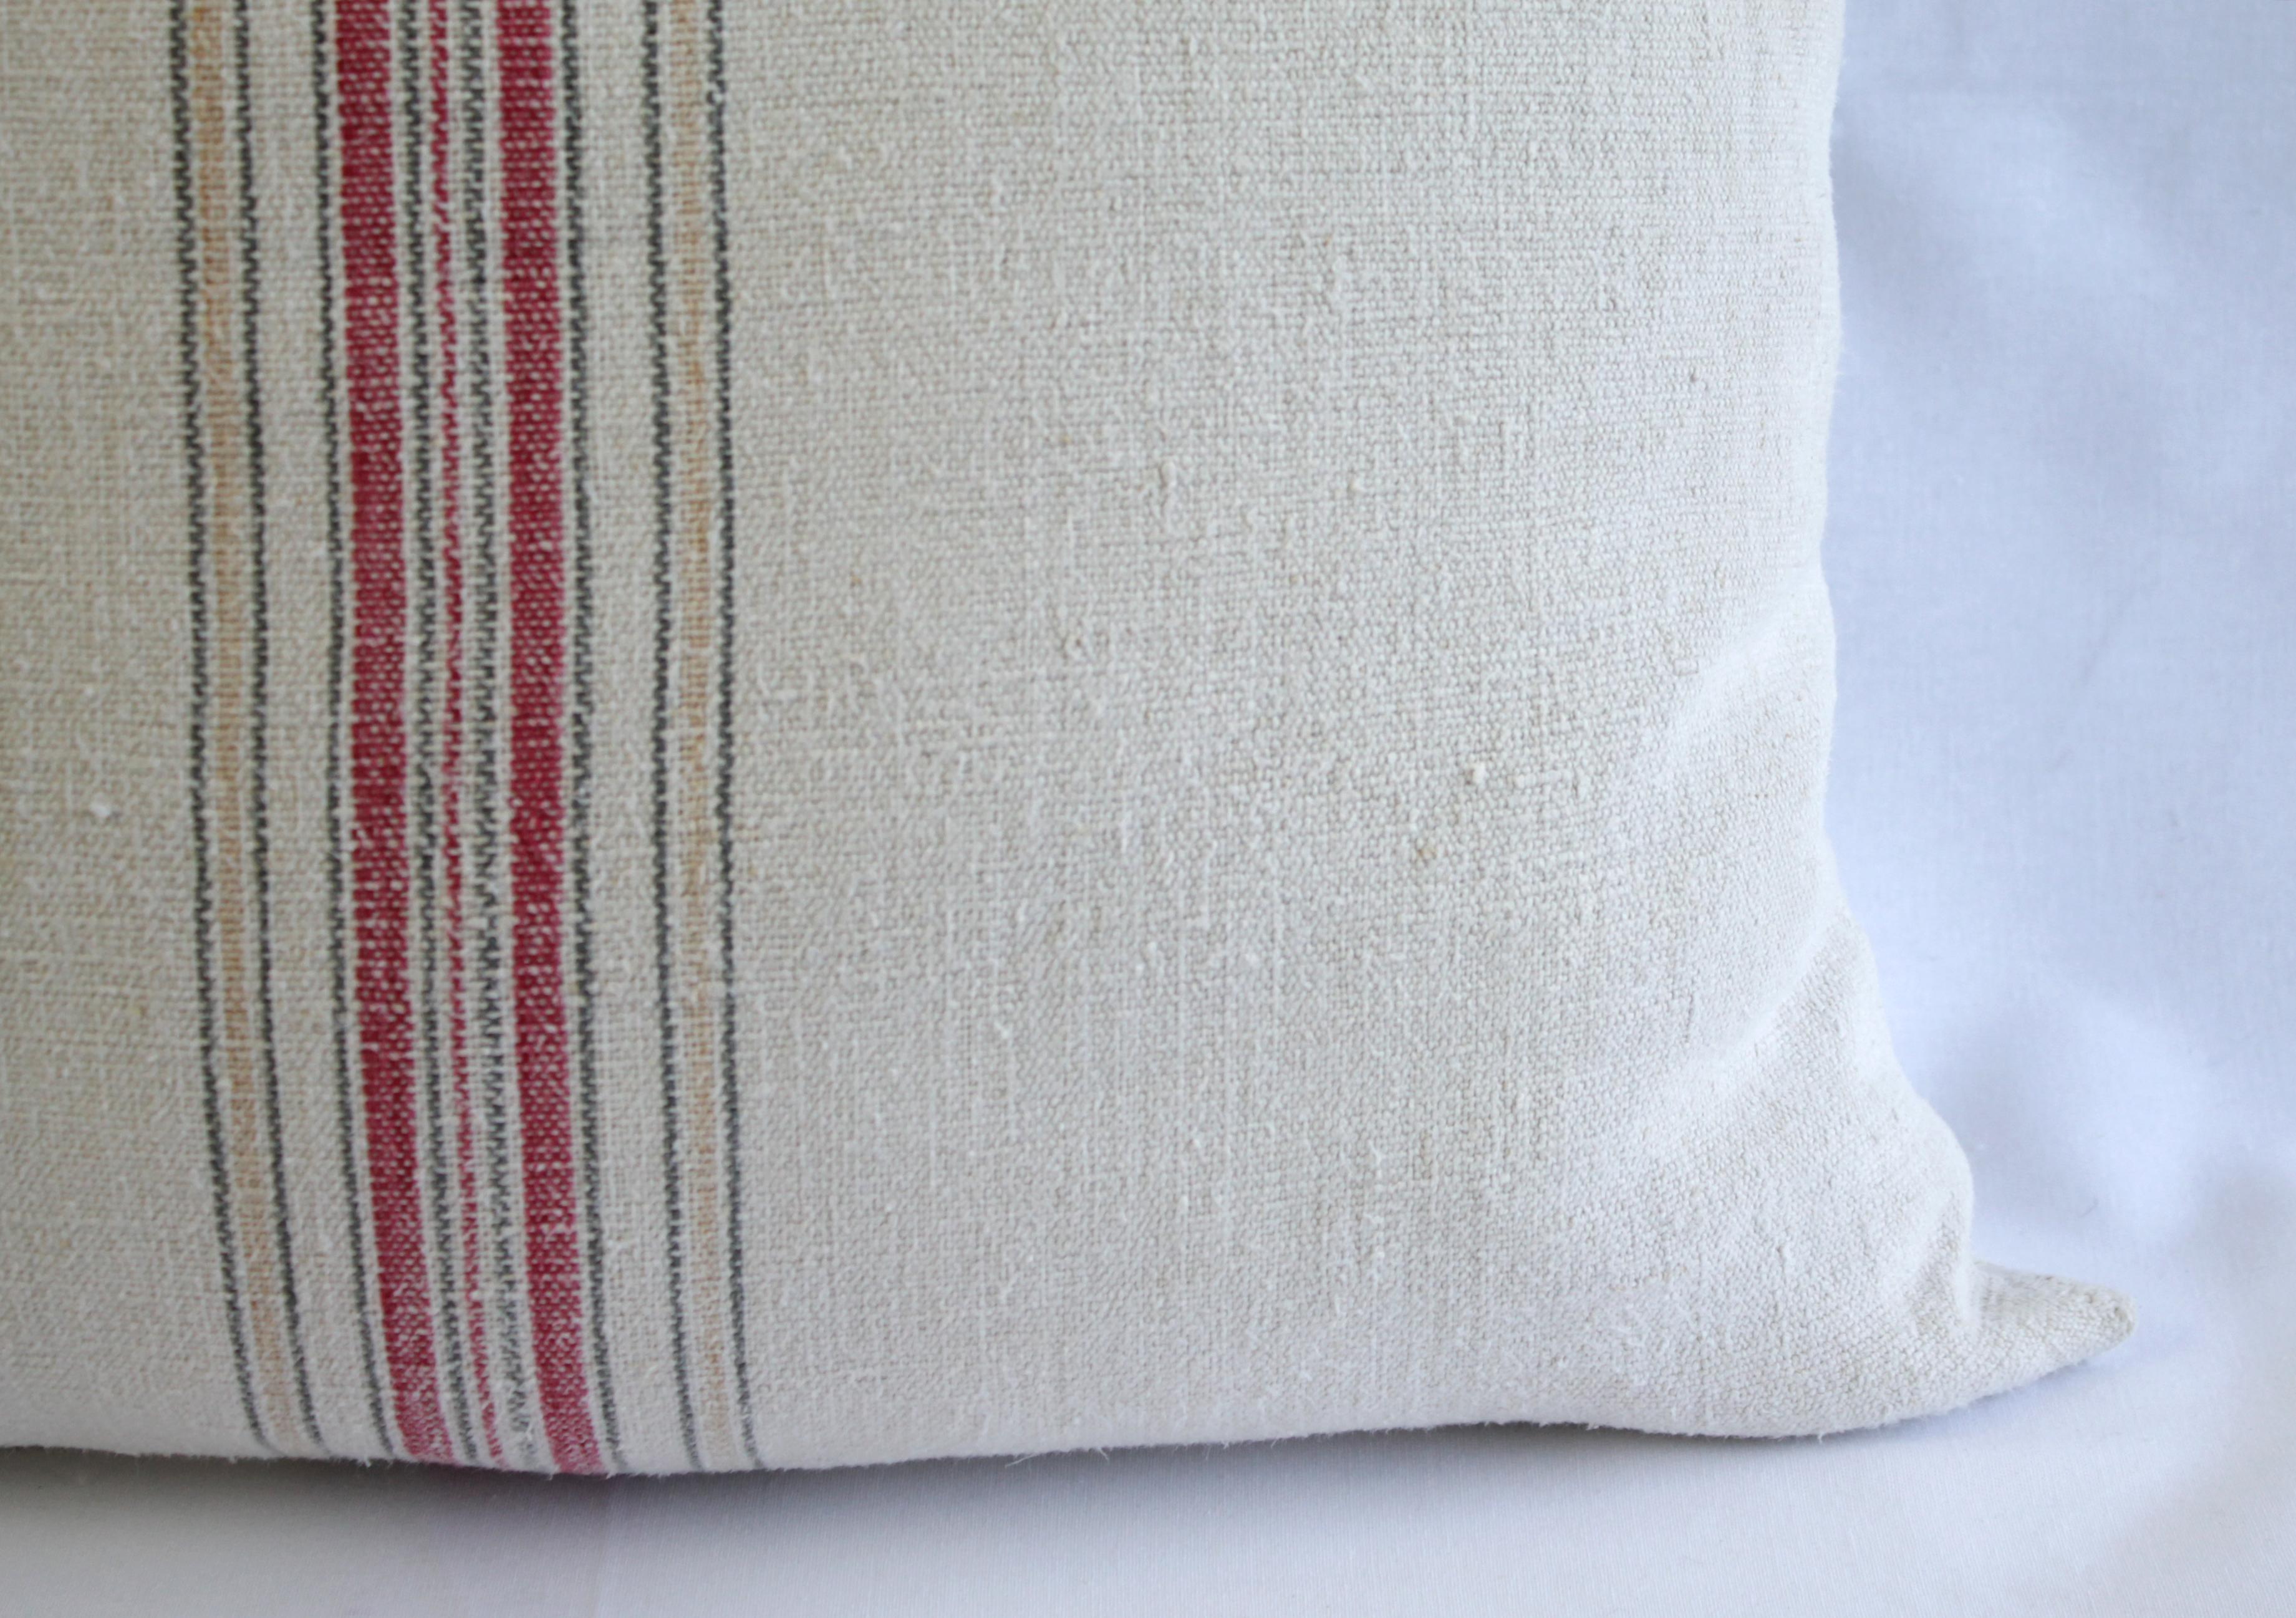 Antique Nubby 19th Century European Red and Tan Stripe with a Monogram Pillow 5